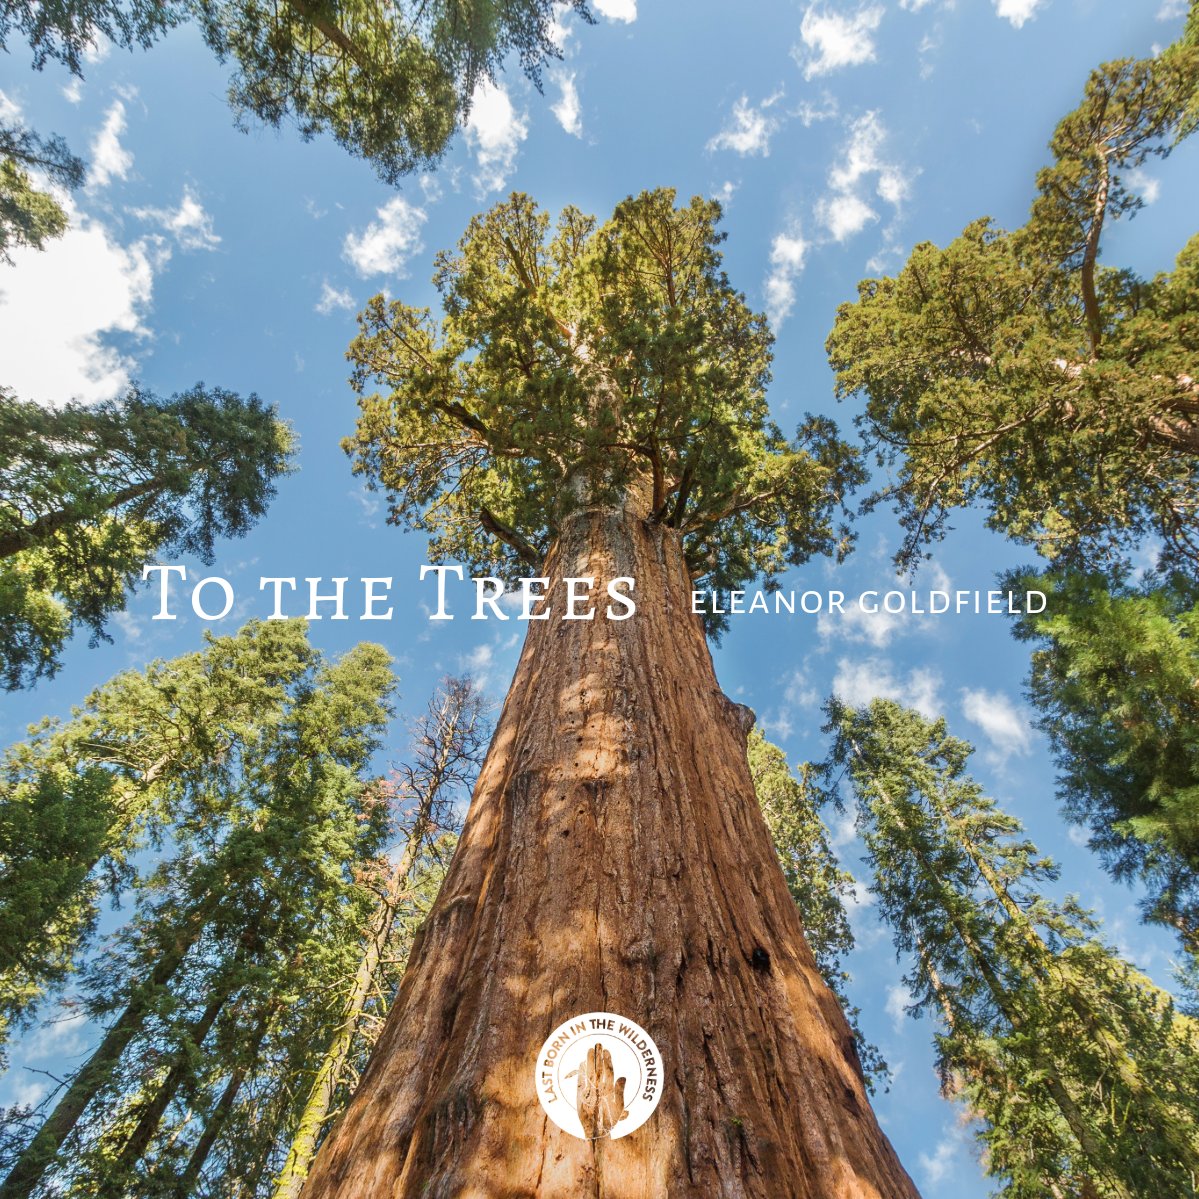 NEW: To The Trees: Diversifying Tactics To Defend The Sacred @ @RadicalEleanor LISTEN: lastborninthewilderness.com/episodes/elean…